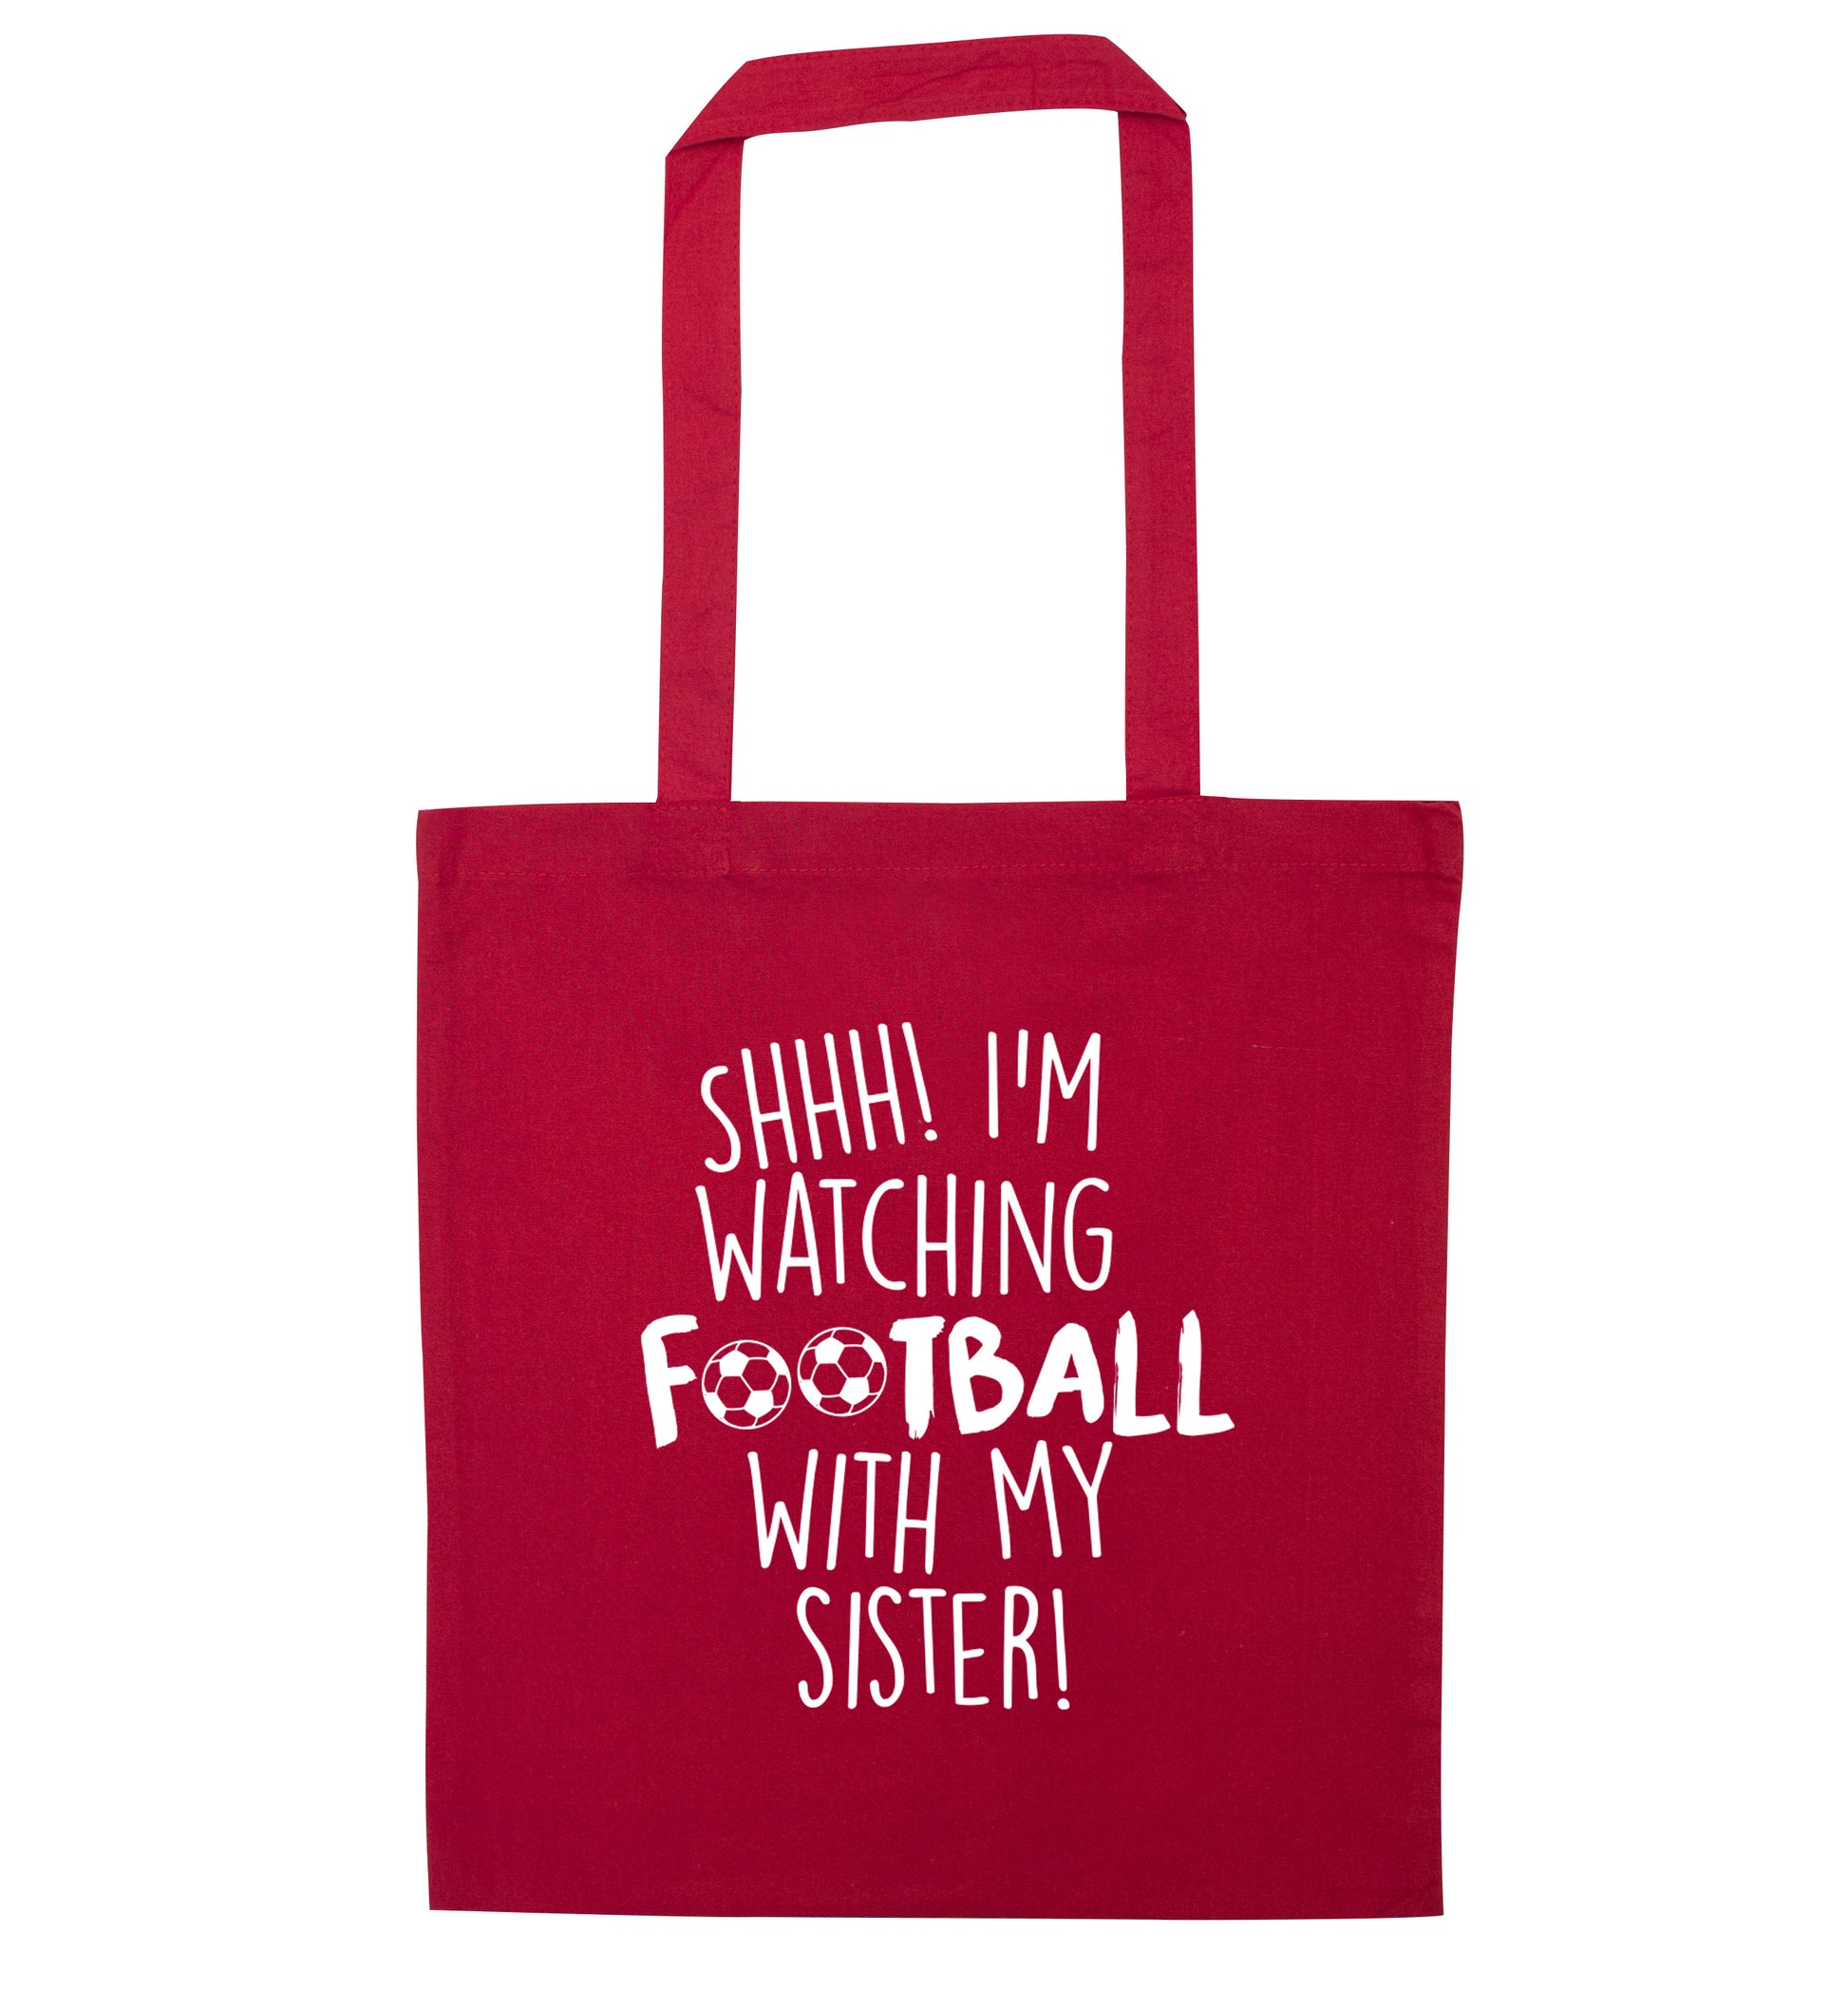 Shhh I'm watching football with my sister red tote bag